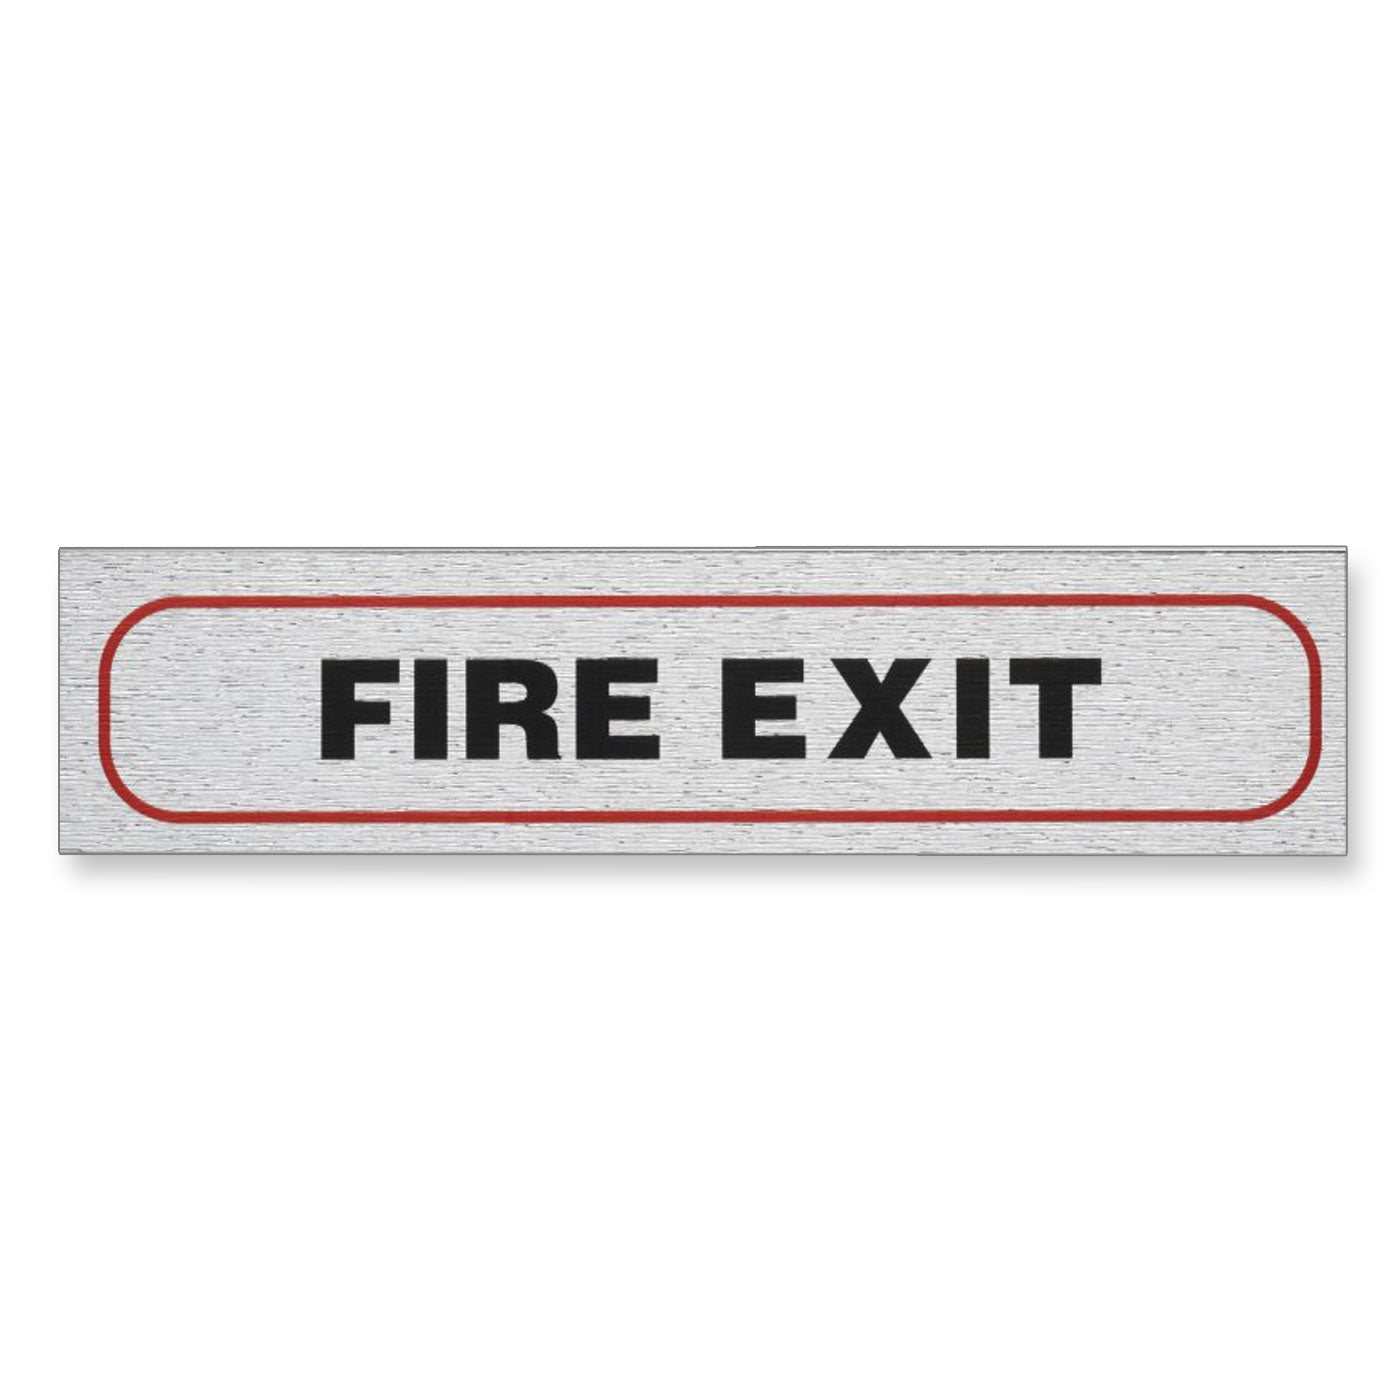 Information Sign "FIRE EXIT" 17 x 4 cm [Self-Adhesive]